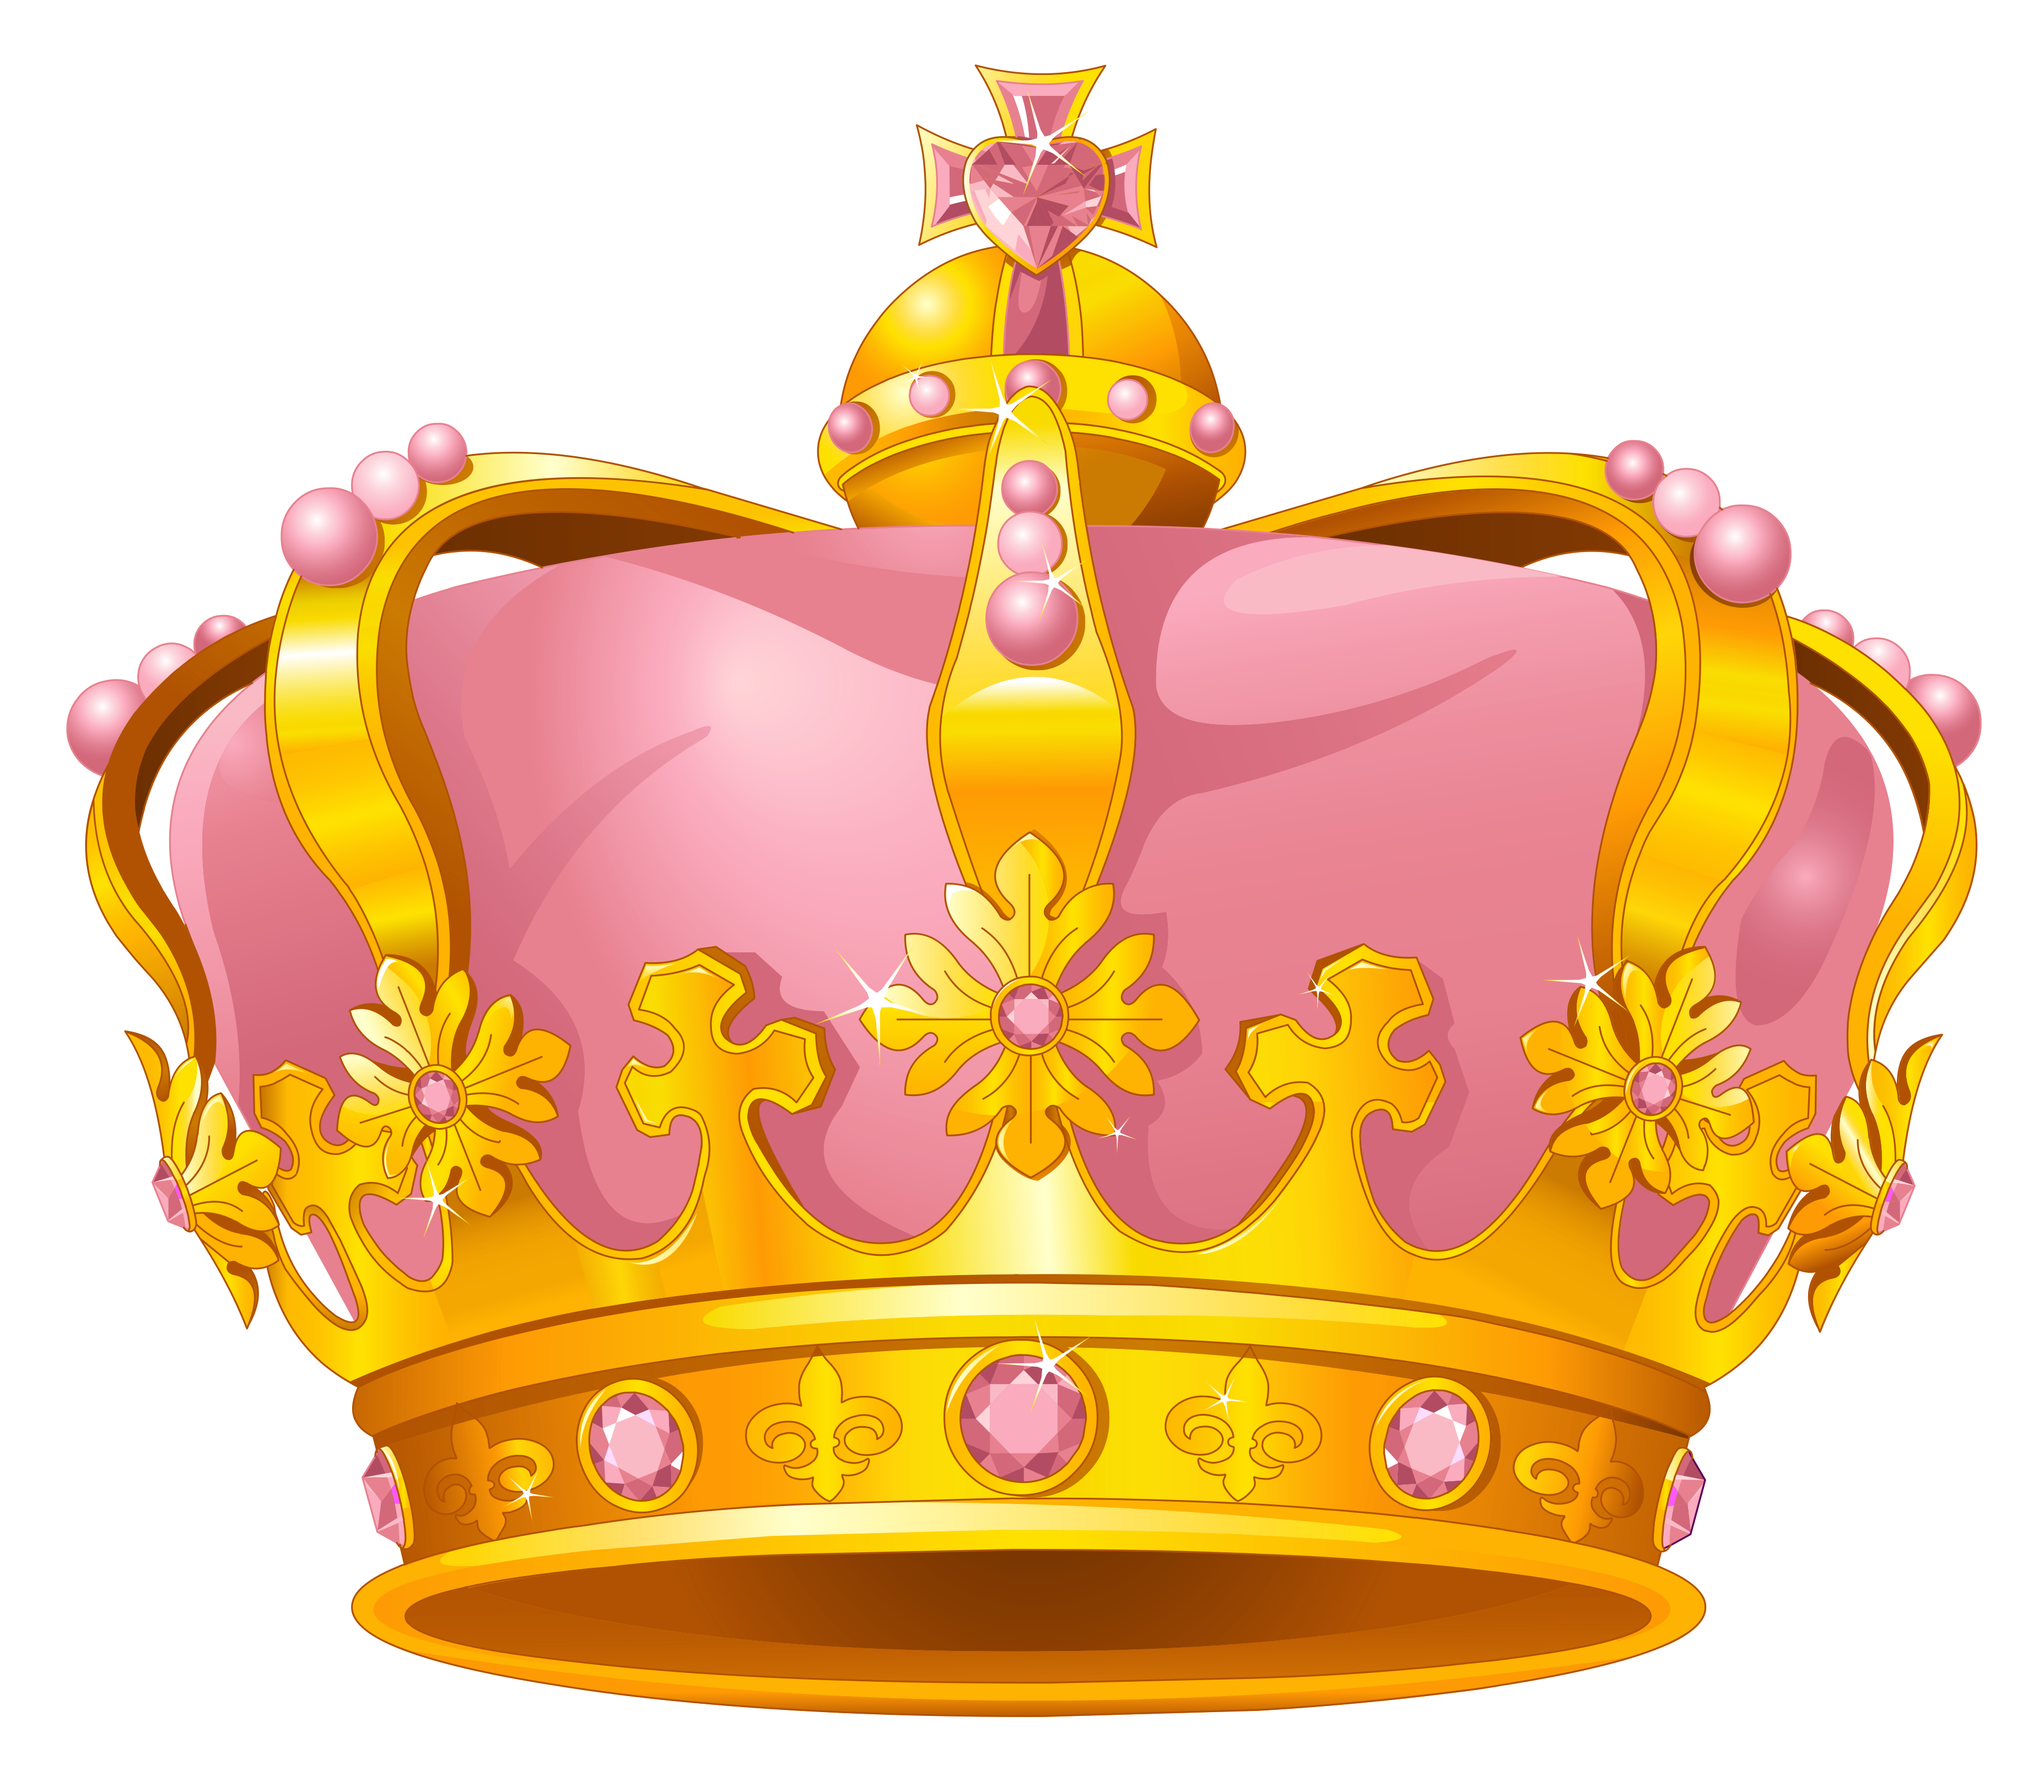 Gold Crown PNG Image File